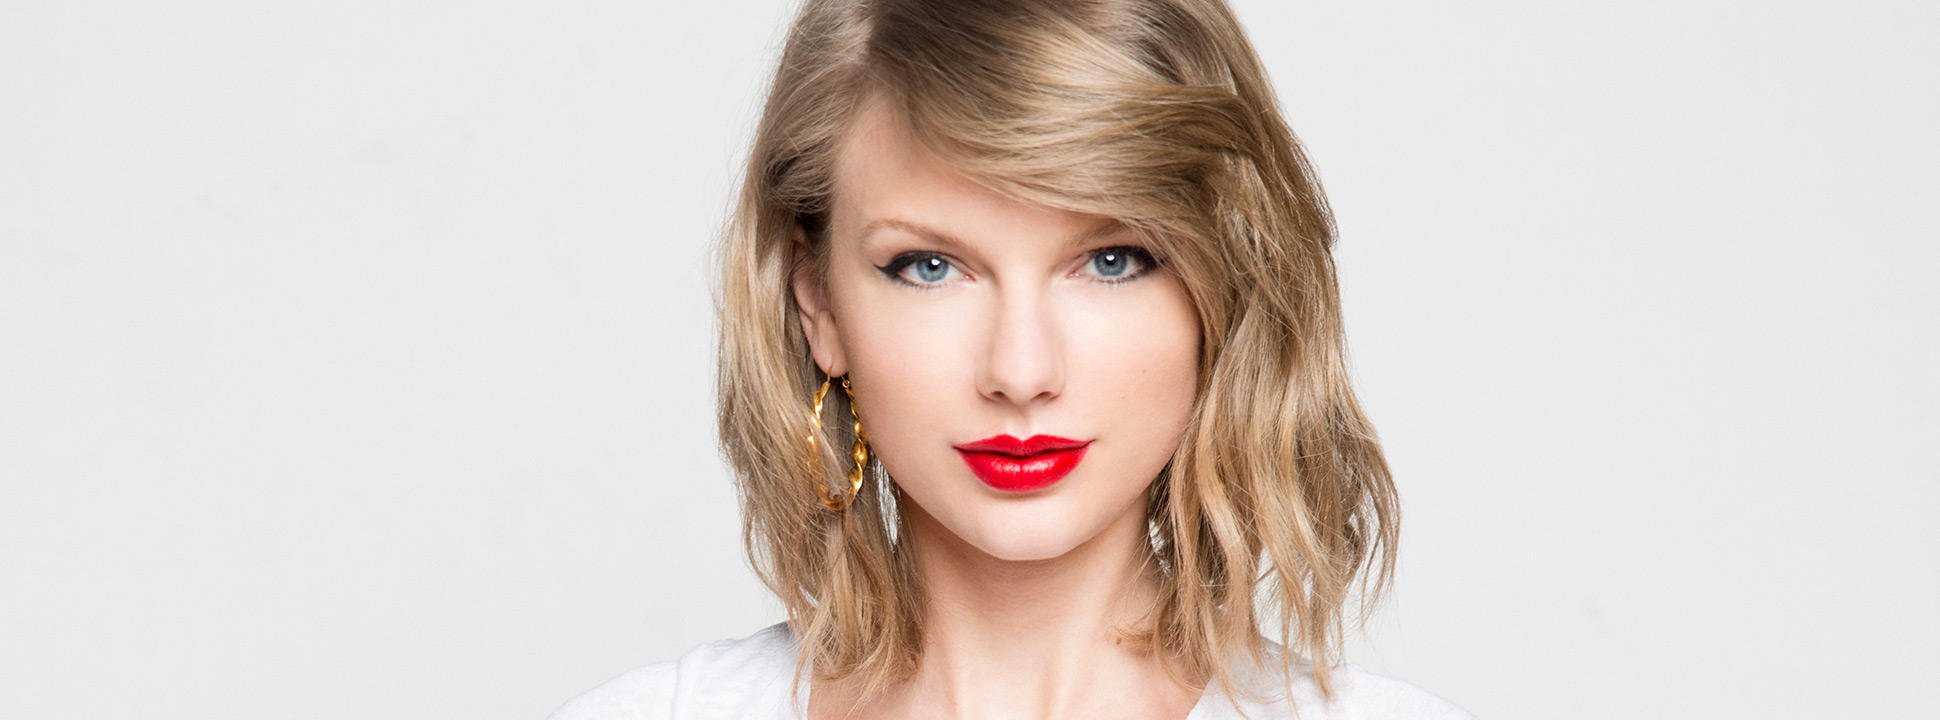 Nice Images Collection: Taylor Swift Desktop Wallpapers